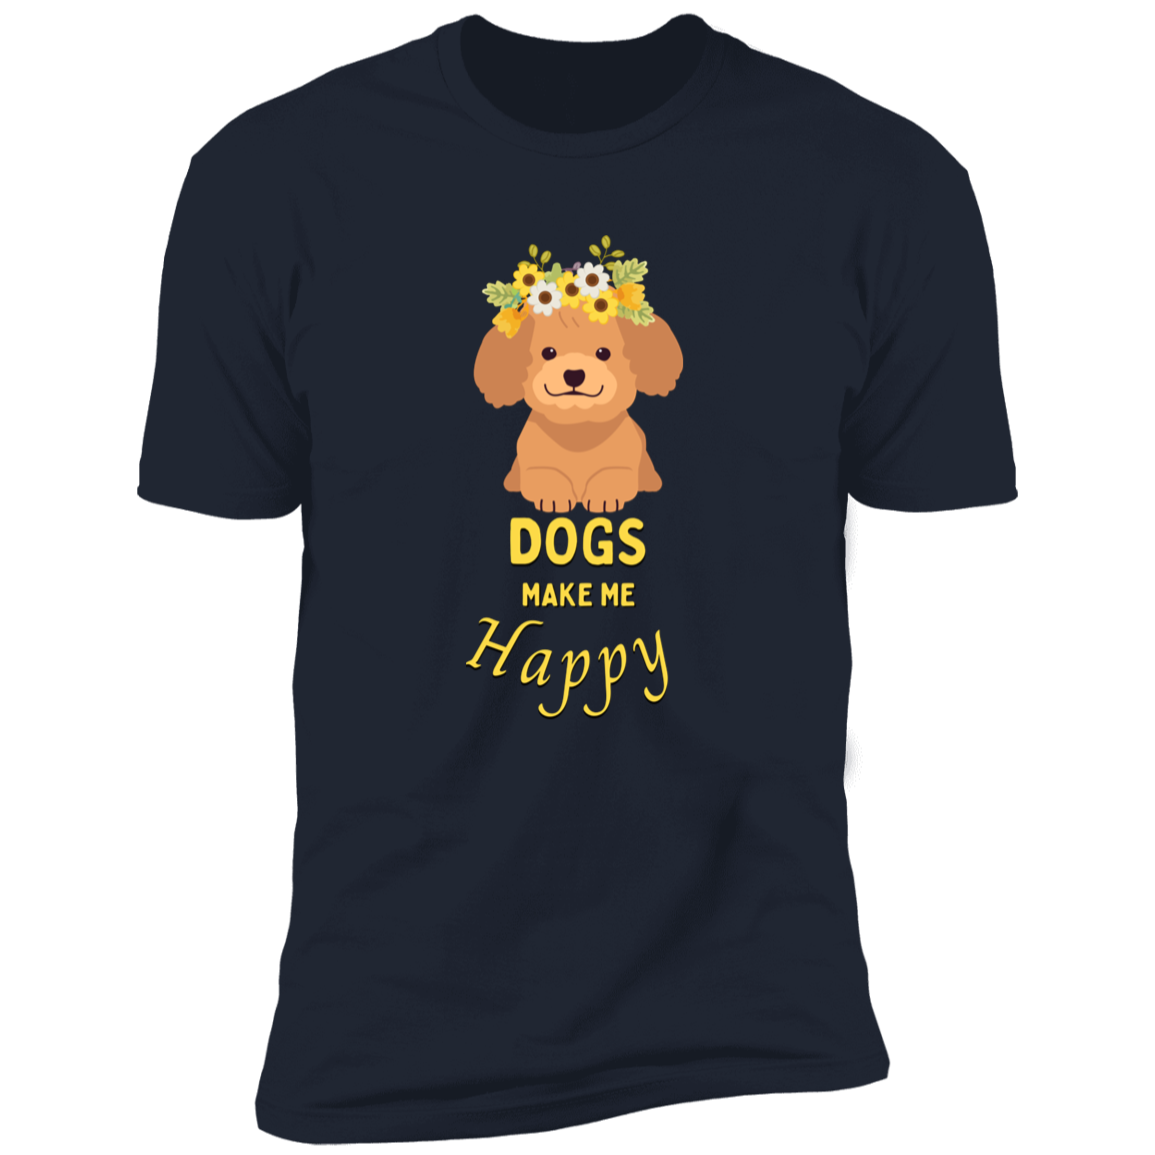 Dogs Make Me Happy t-shirt, funny dog shirt for humans, in navy blue